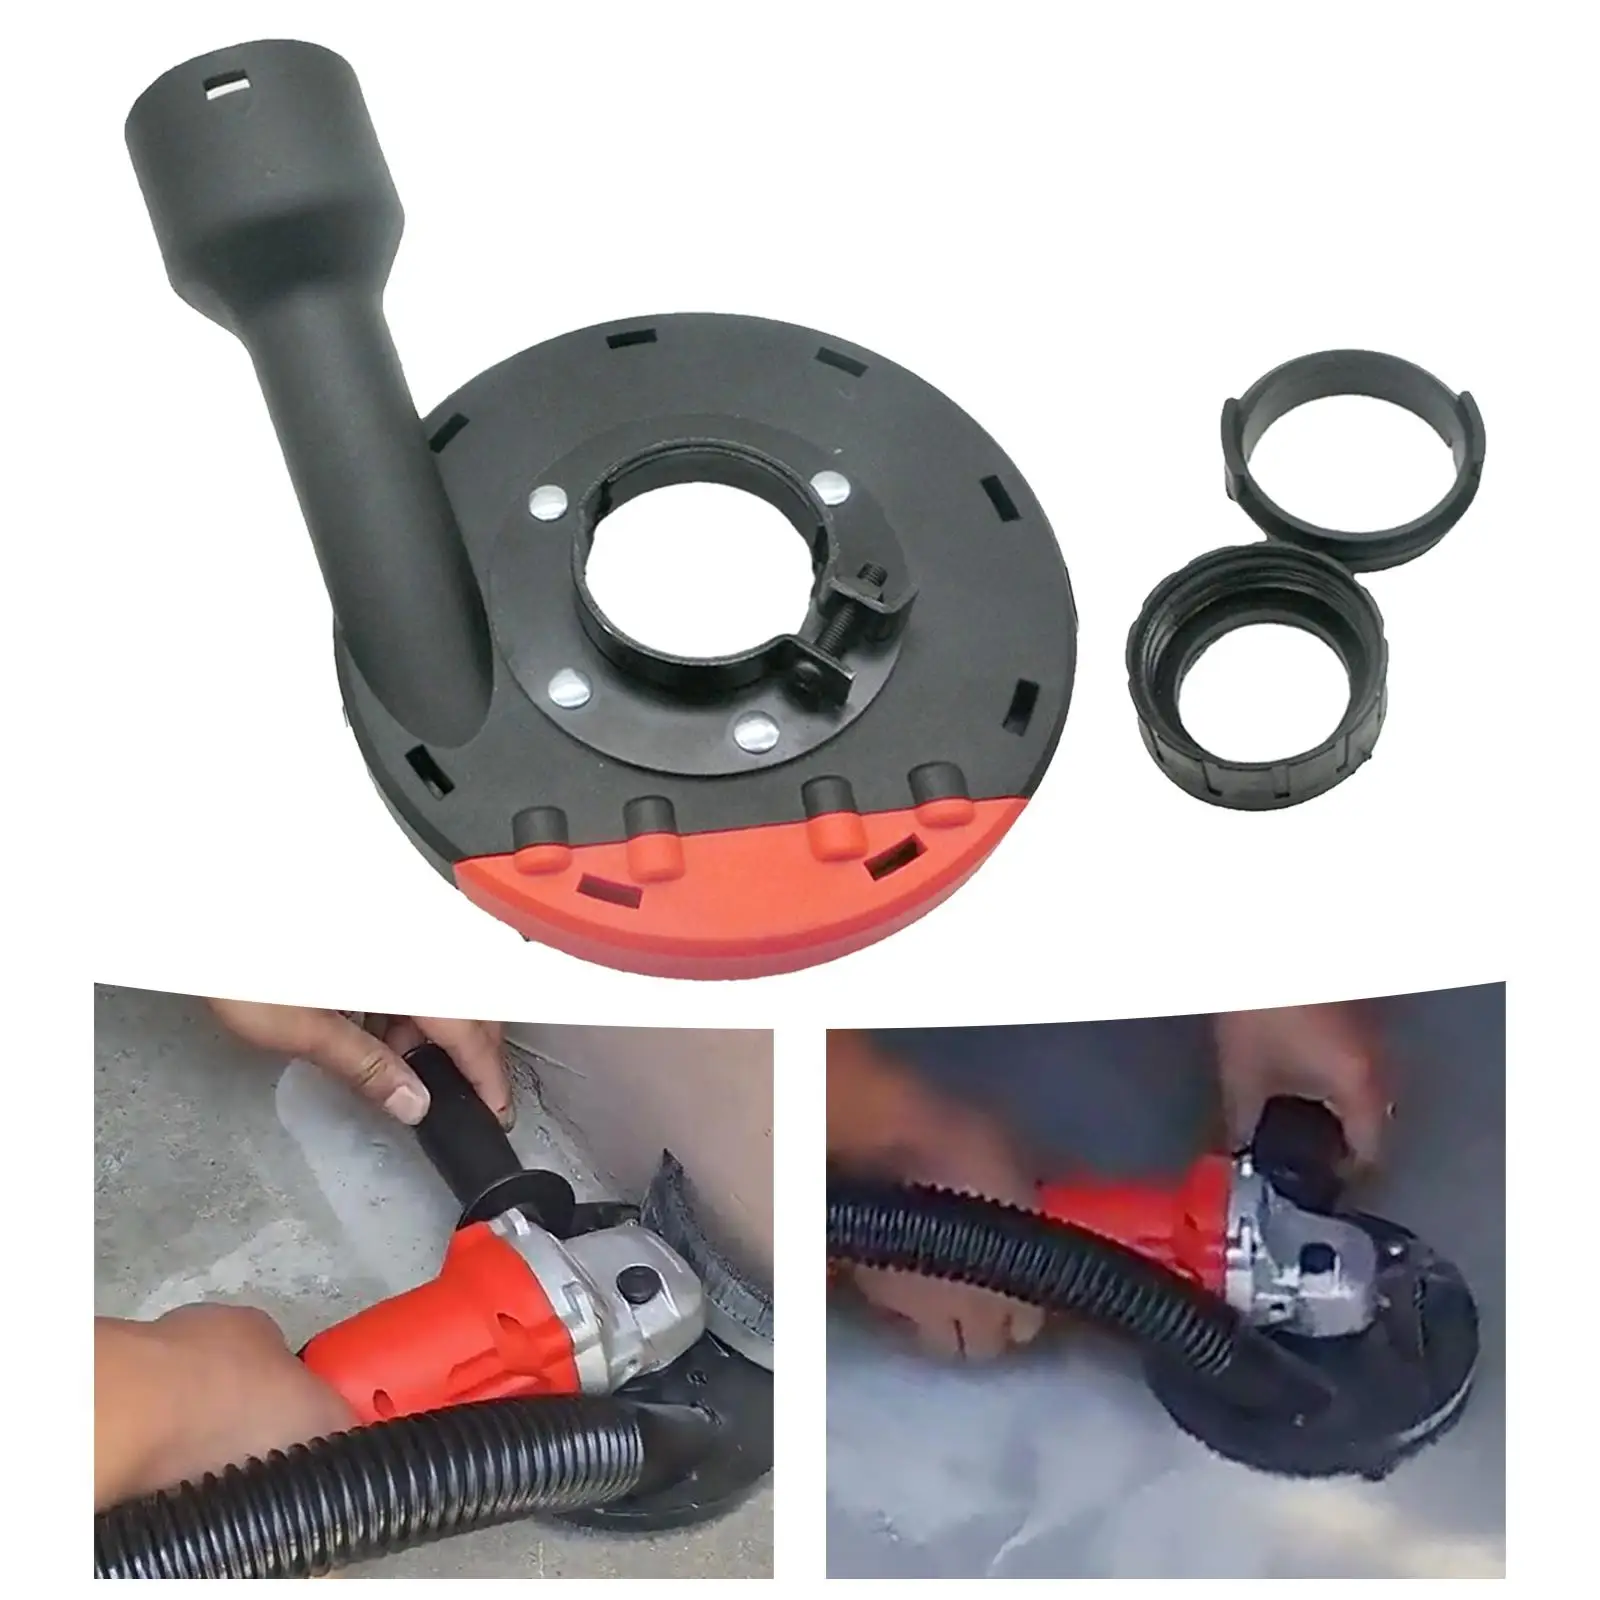 Angle Grinder Dust Cover Grinder Dust Collector Grinder Attachments 140mm for Granite Concrete Angle Grinder Accessories Tools